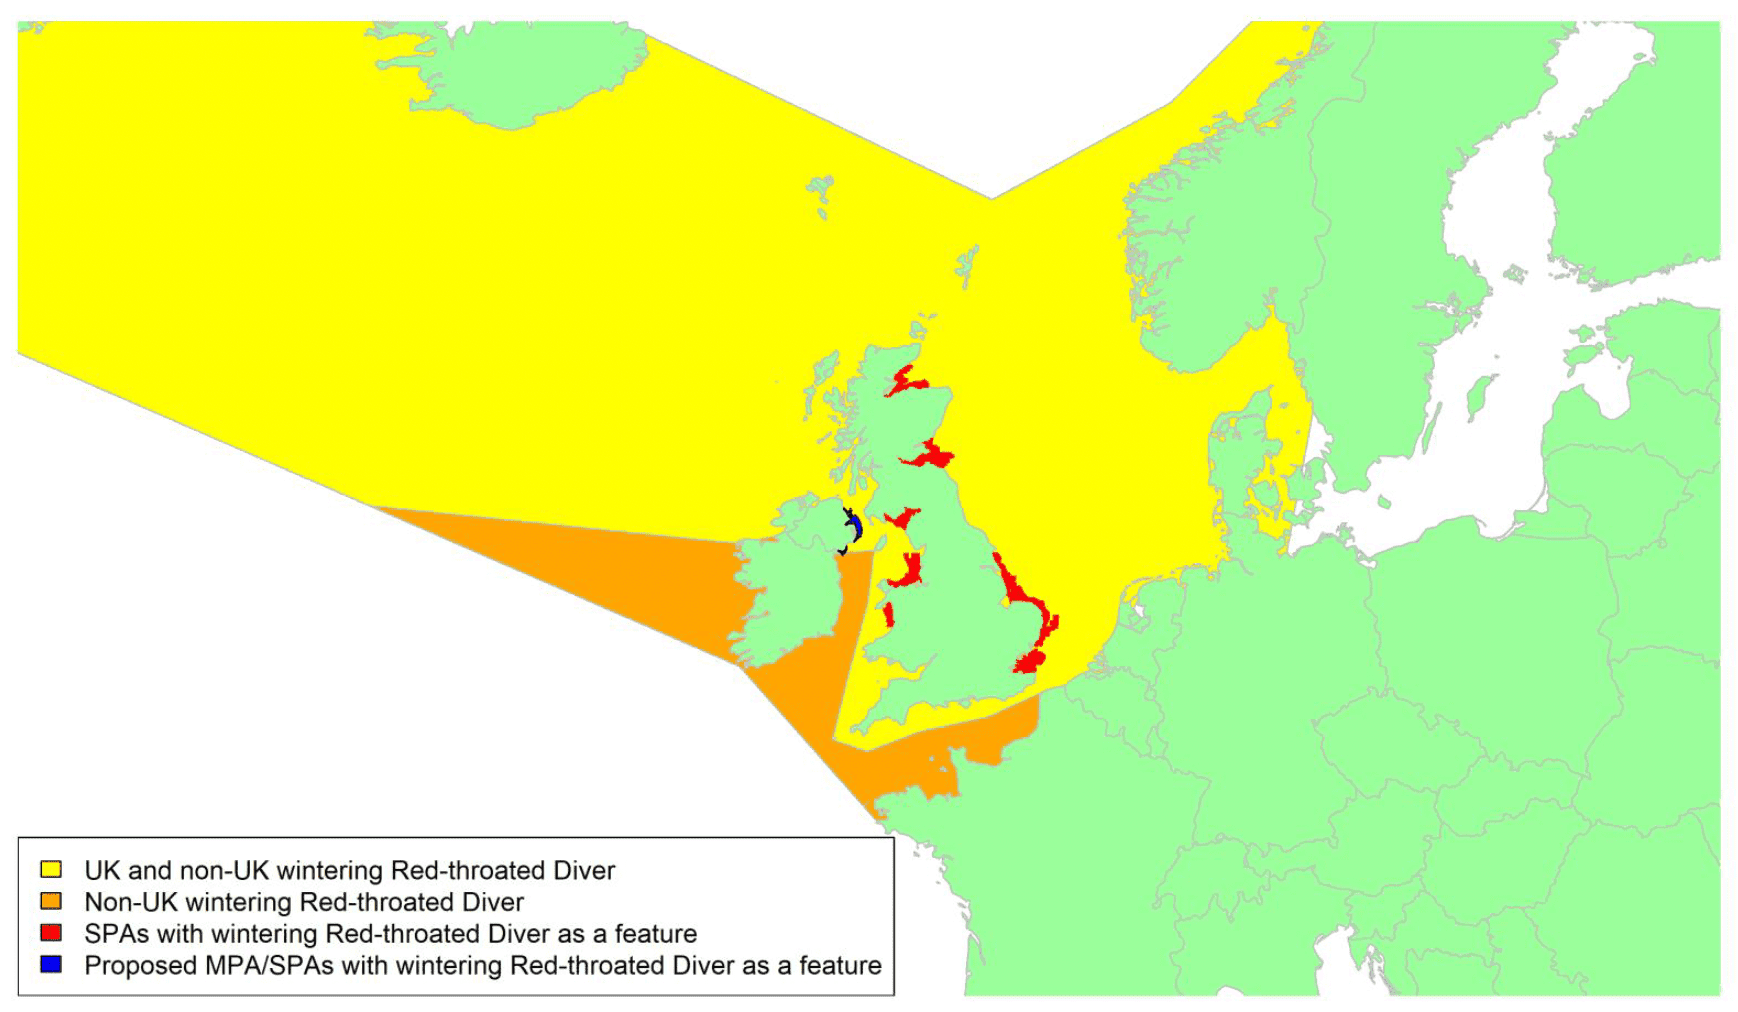 Map of North West Europe showing migratory routes and SPAs within the UK for wintering Red-throated Diver as described in the text below.